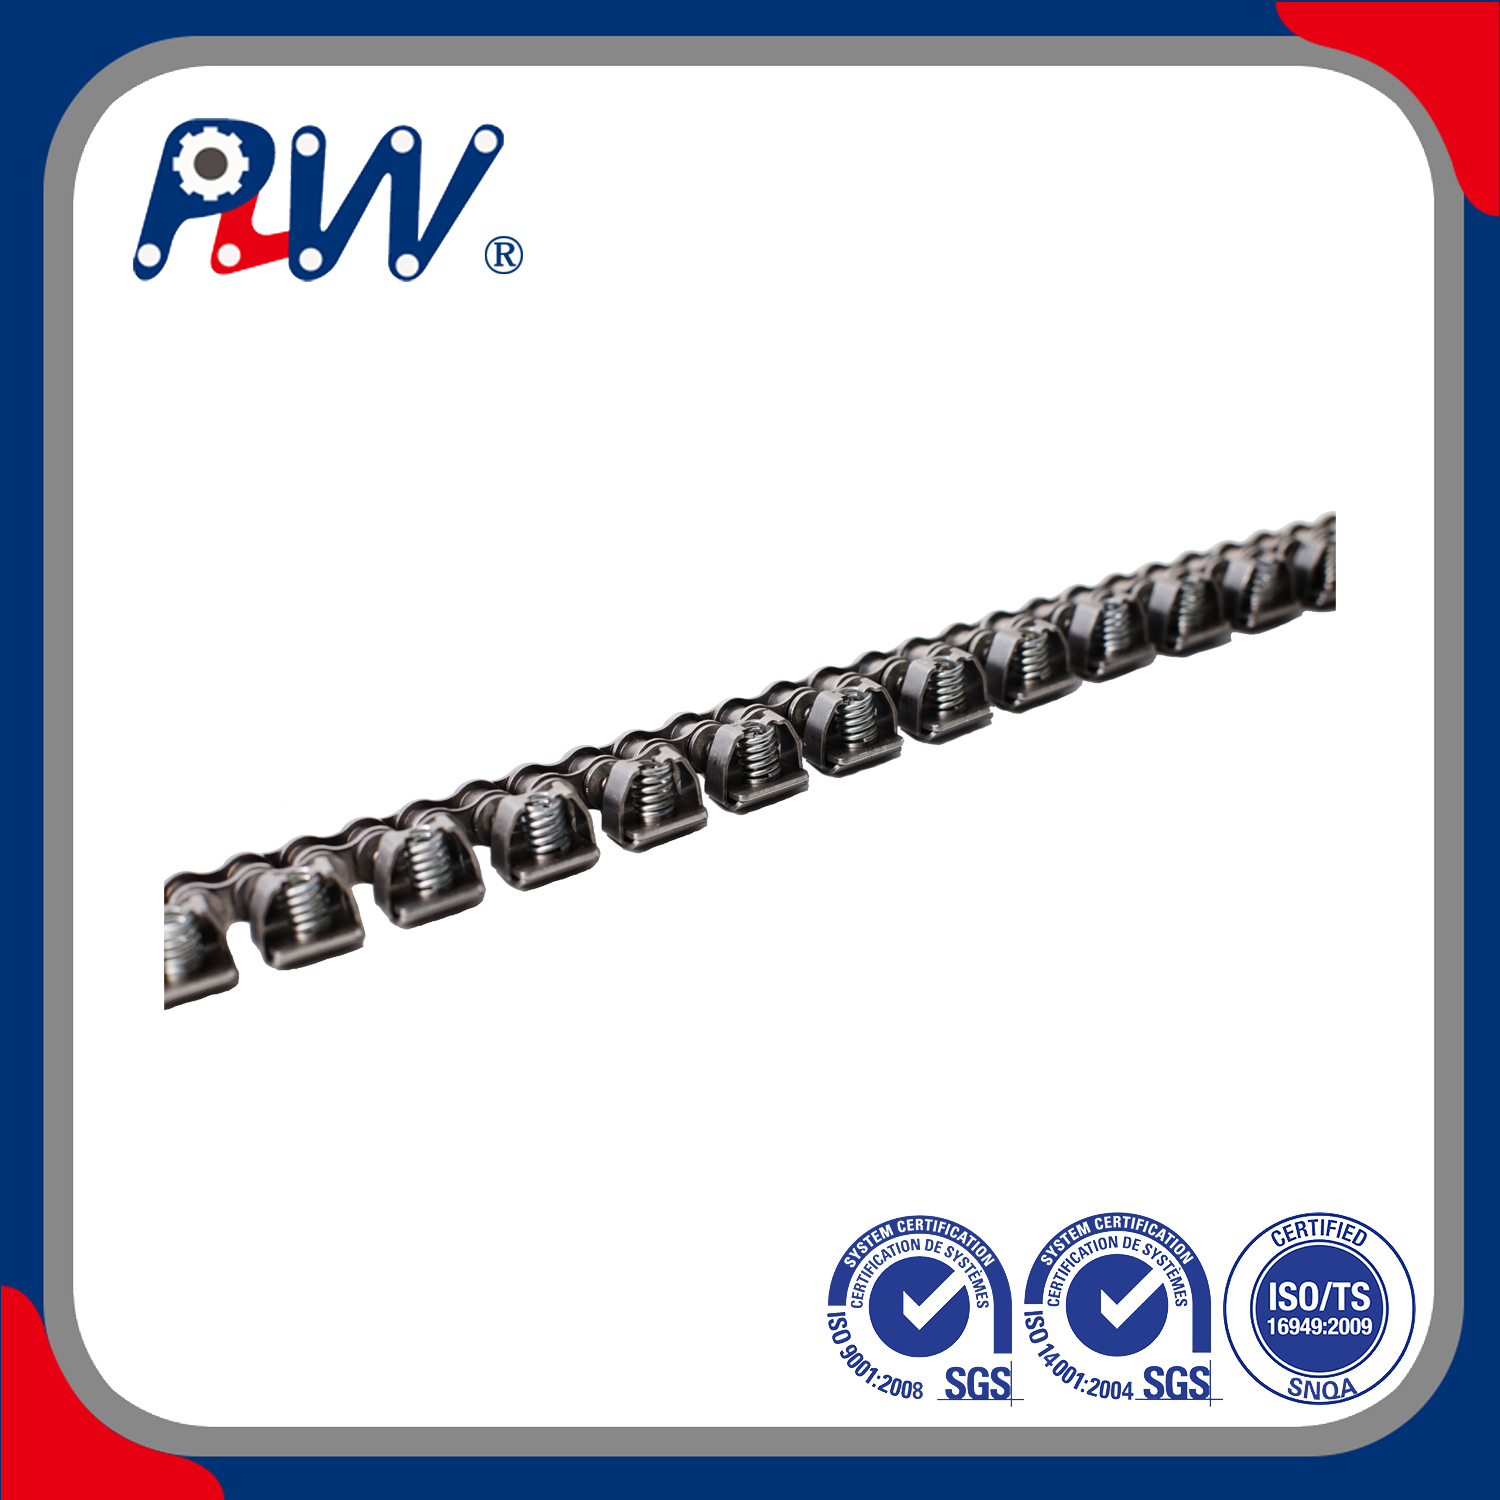 China Professional Hot Selling Industrial Standard Stainless Steel Grip Chains